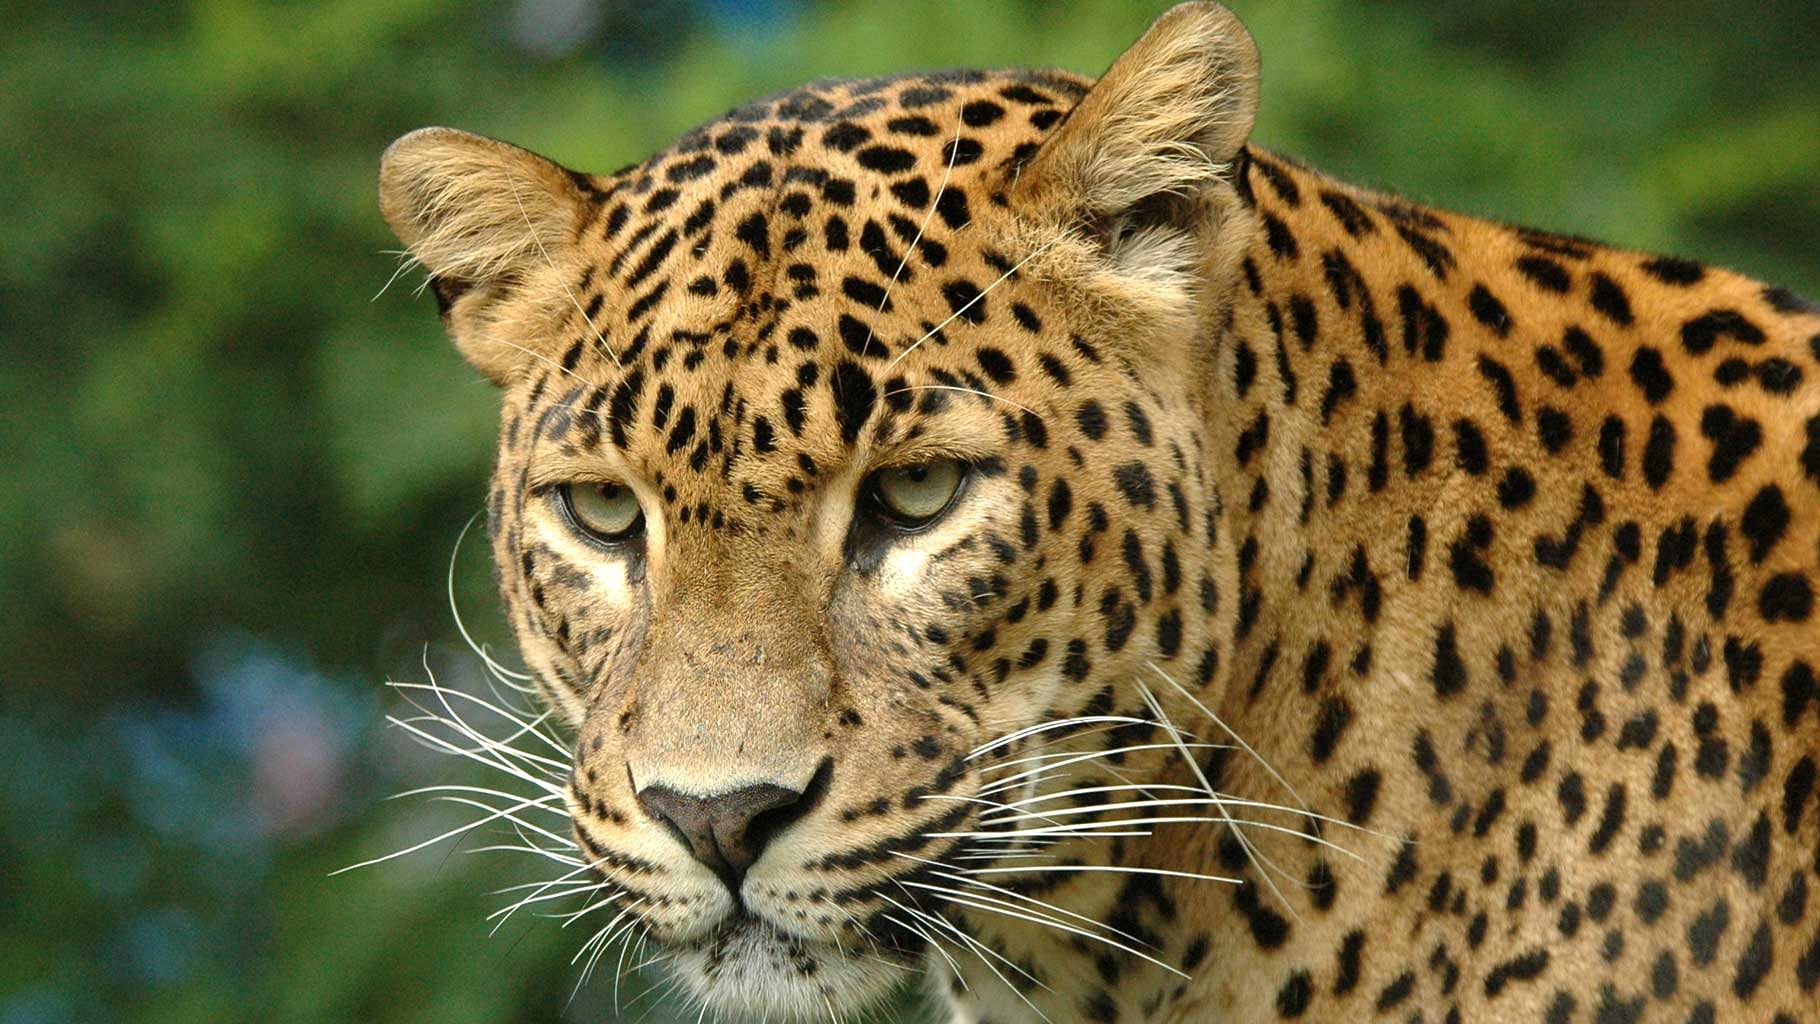 The leopard disappeared into the storm drains along the runway. A search is on to locate the animal. (Photo: iStock) 